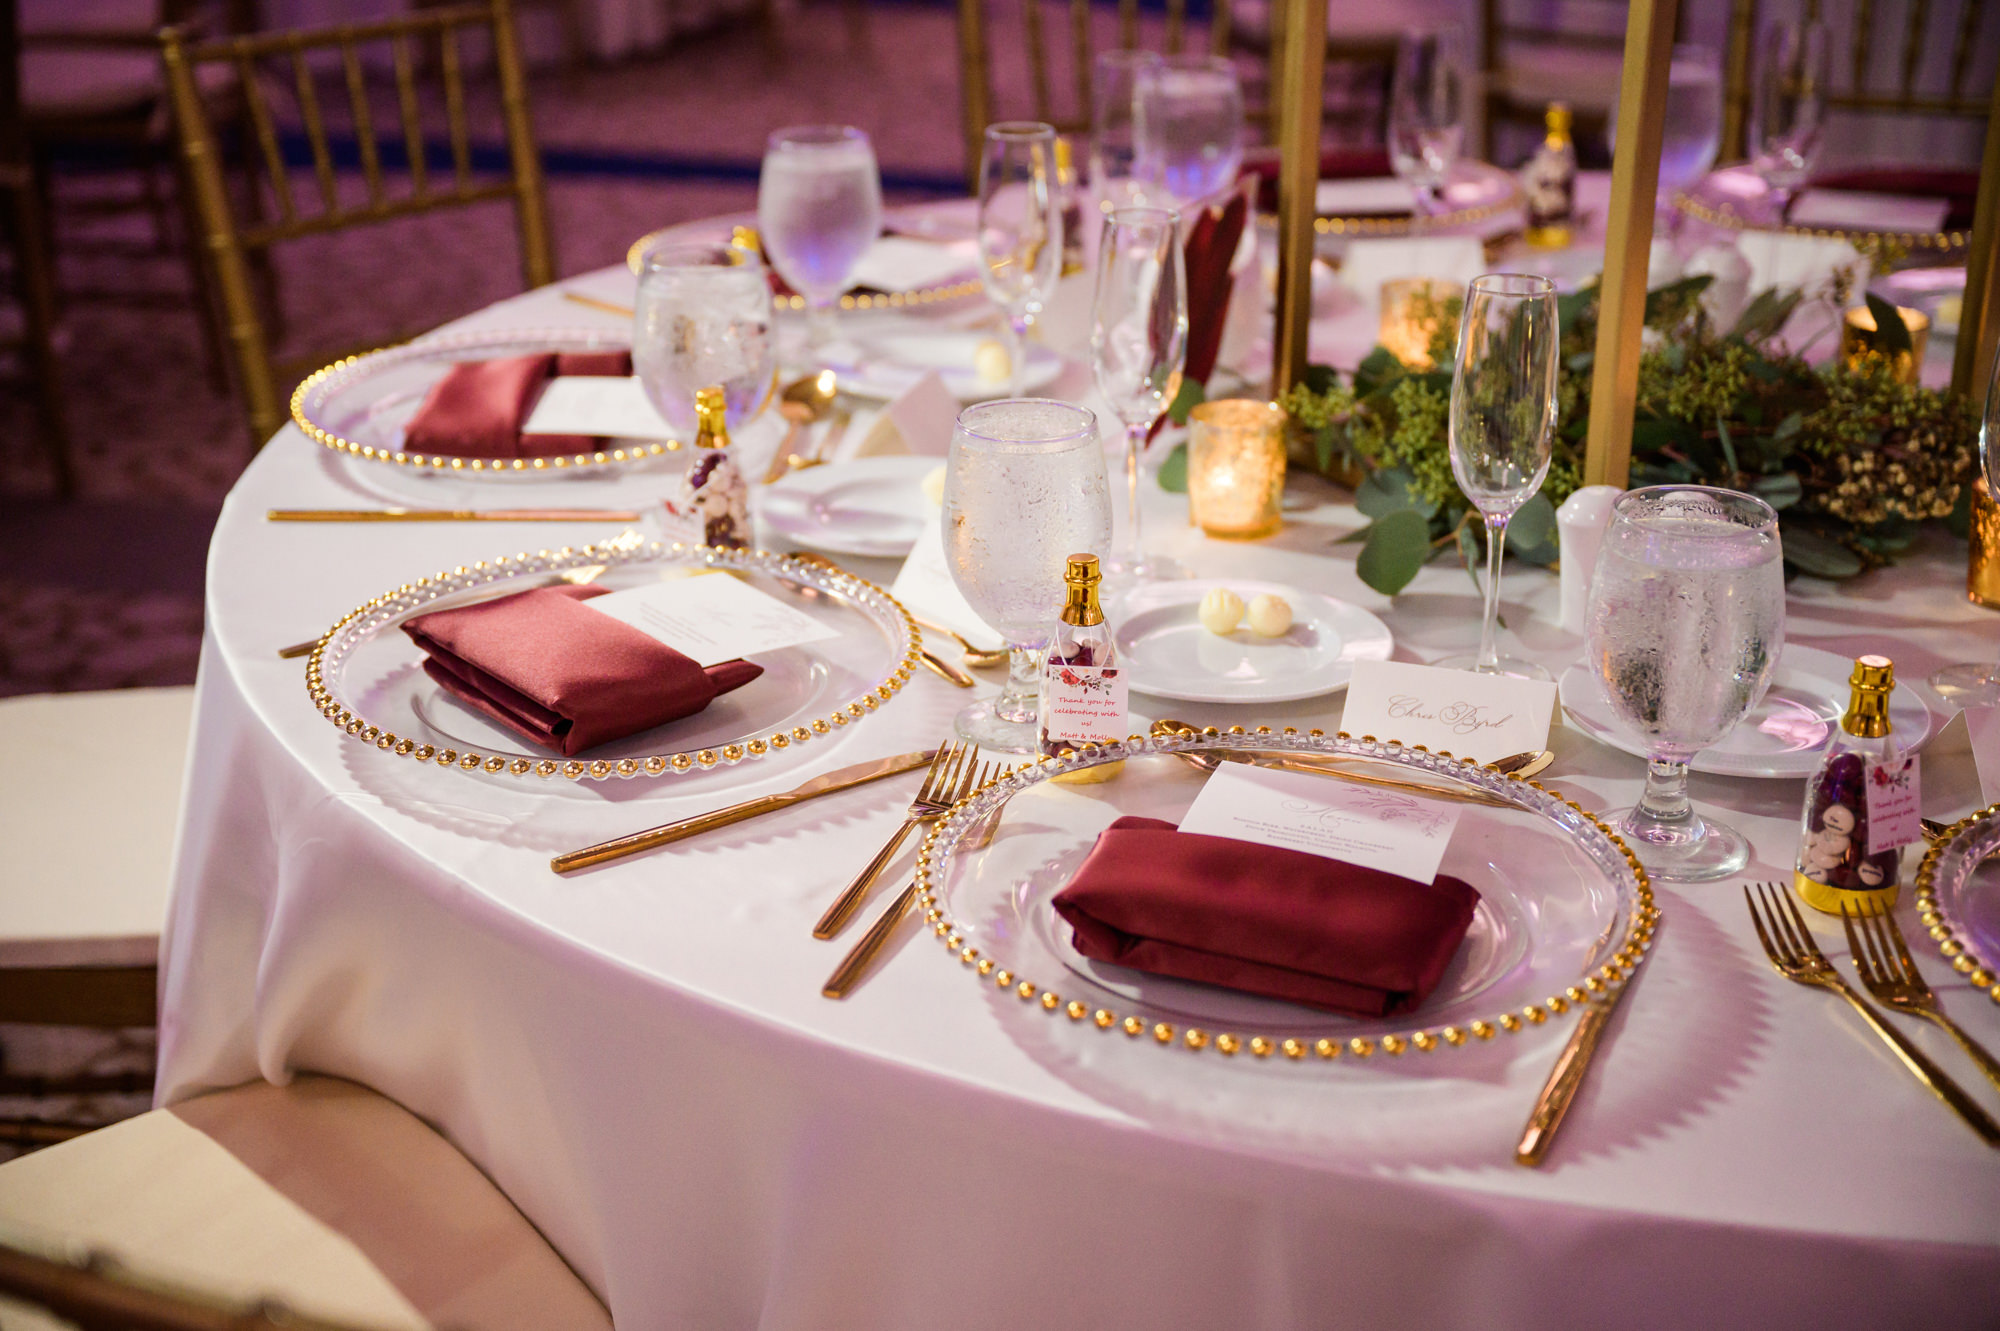 Elegant Wedding Reception Tabletop Ideas | Gold Beaded Chargers with Gold Flatware | Gold Taper Candles with Burgundy Maroon Napkin | Clearwater Wedding Rentals Gabro Event Services